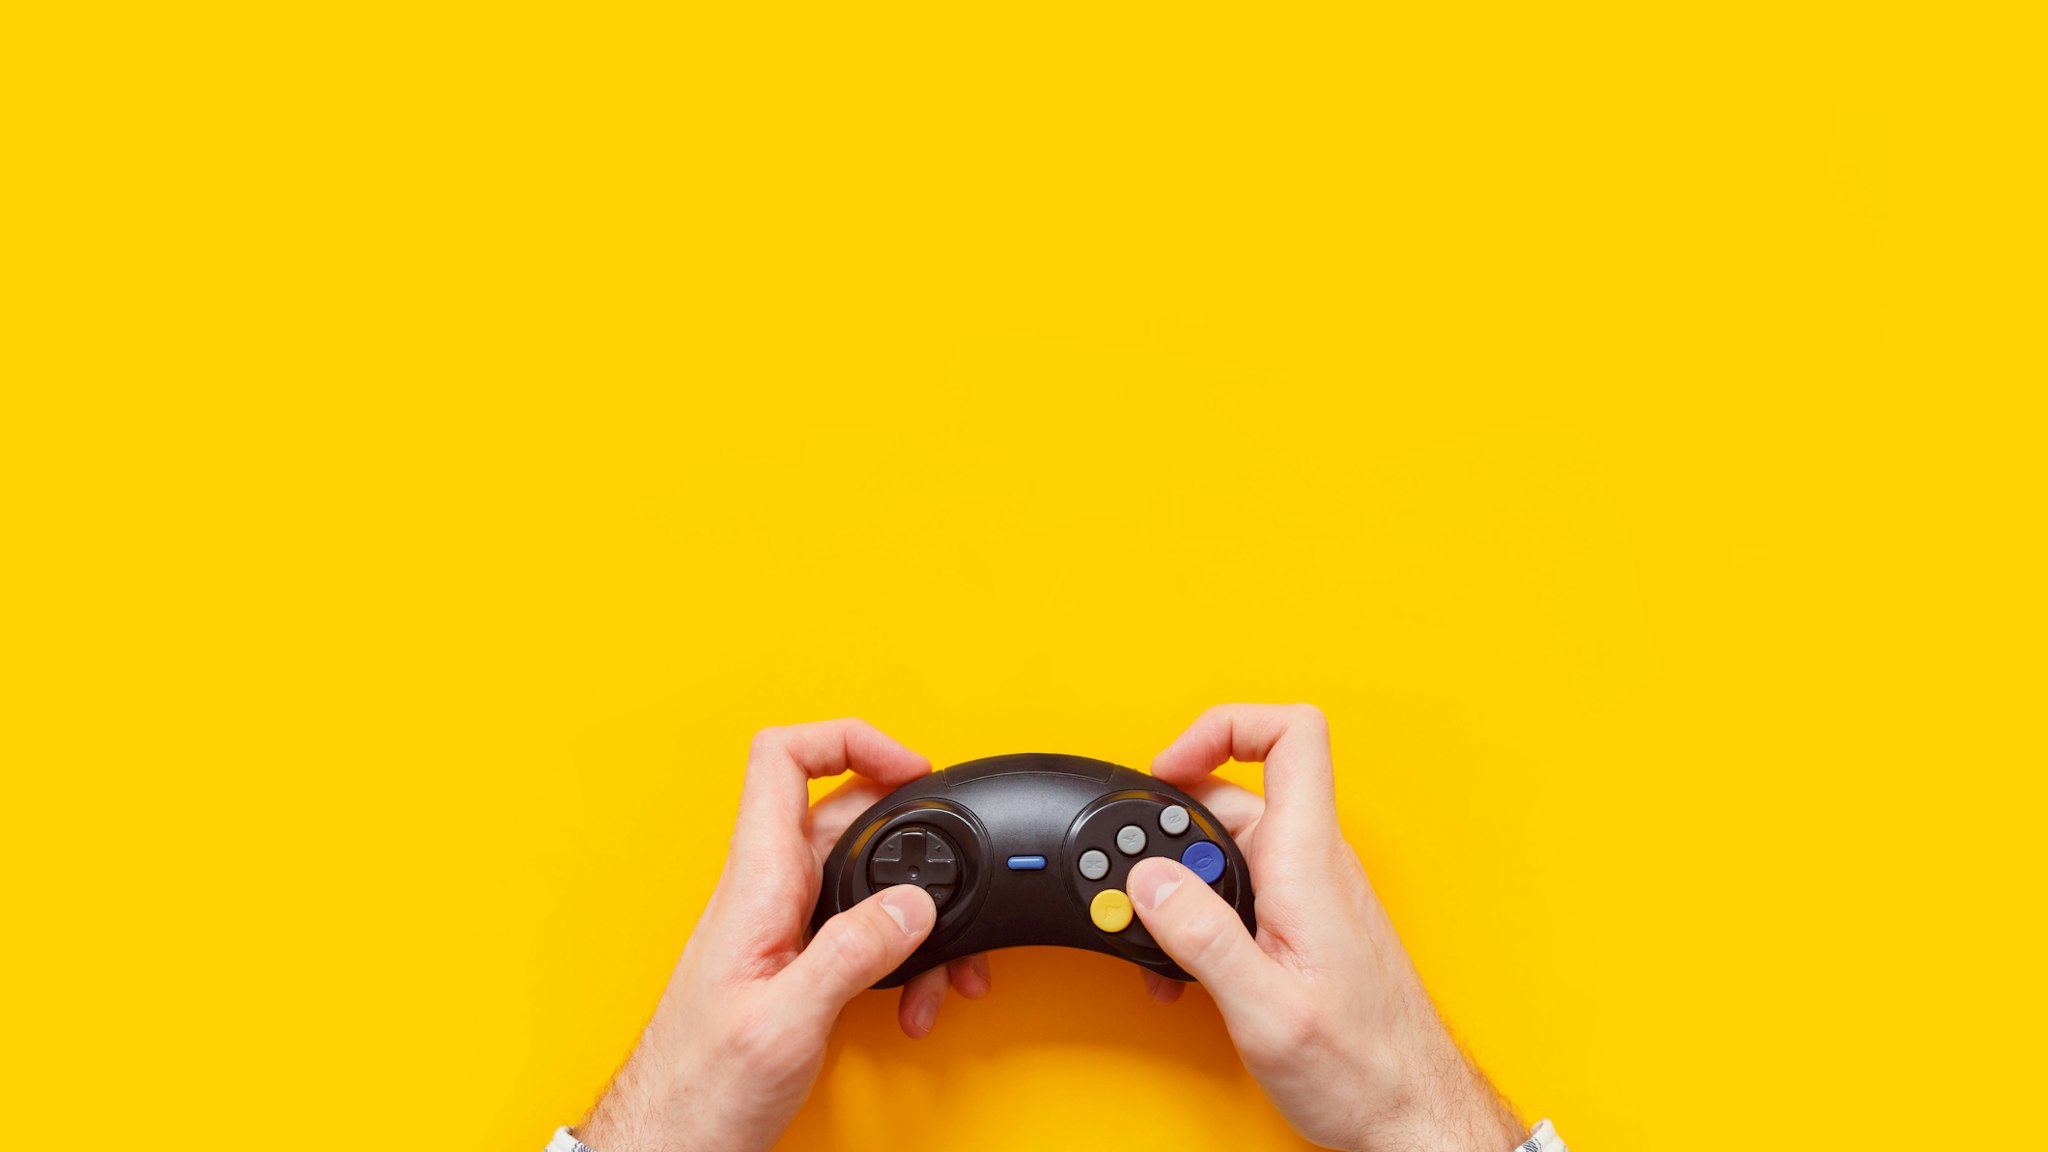 Cropped Hand Of Man Holding Joystick Over Yellow Background - stock photo